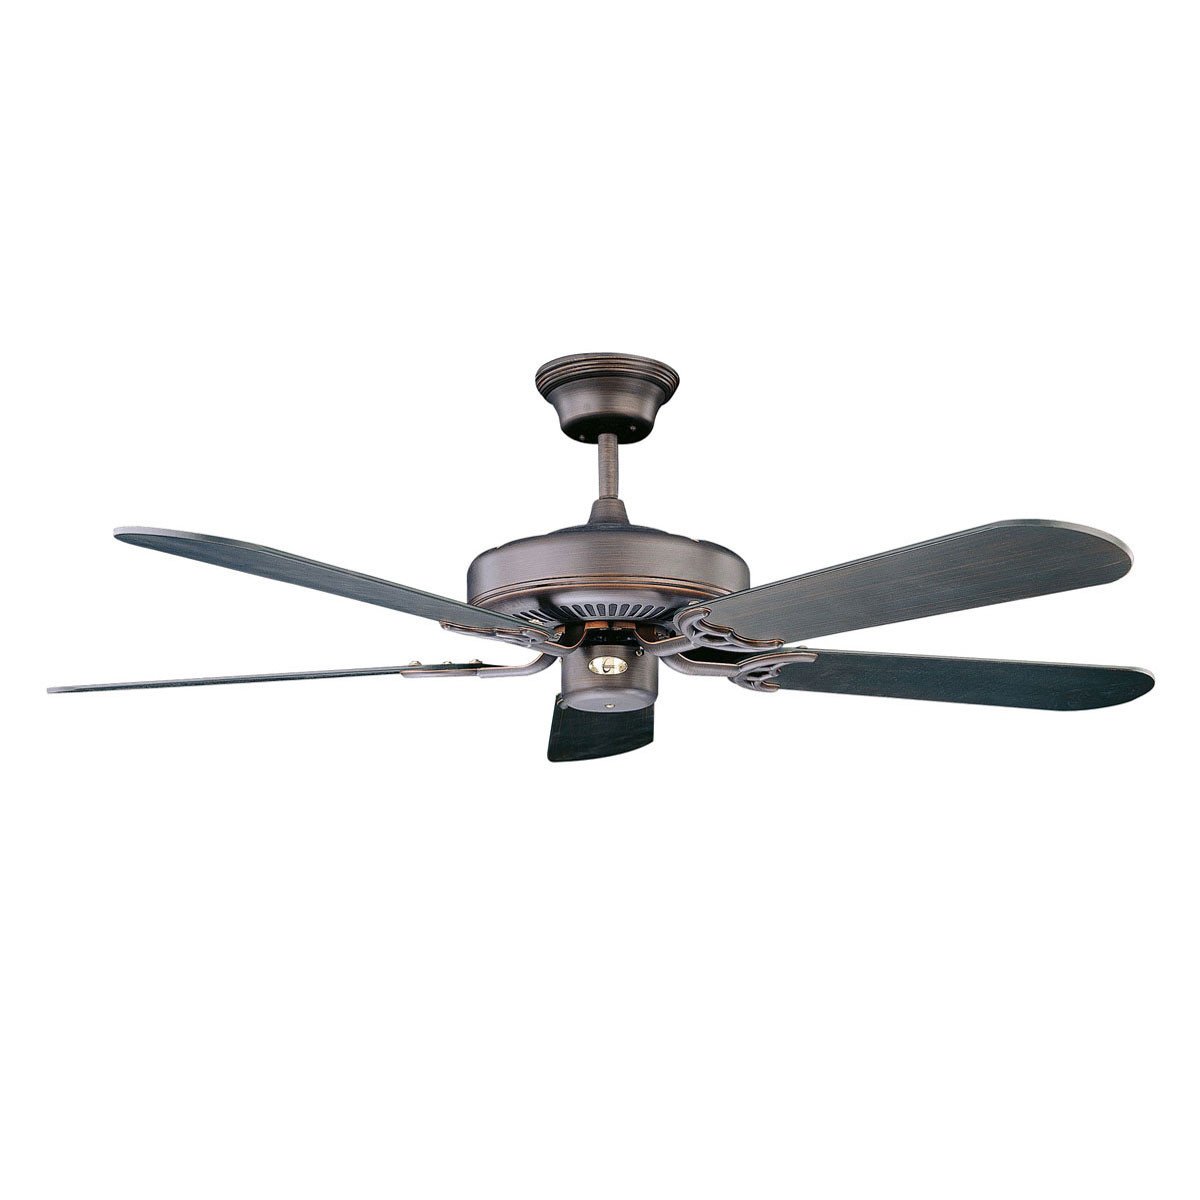 Concord Fans Decorama Energy Saver Modern 52" Oil Rubbed Bronze Ceiling Fan